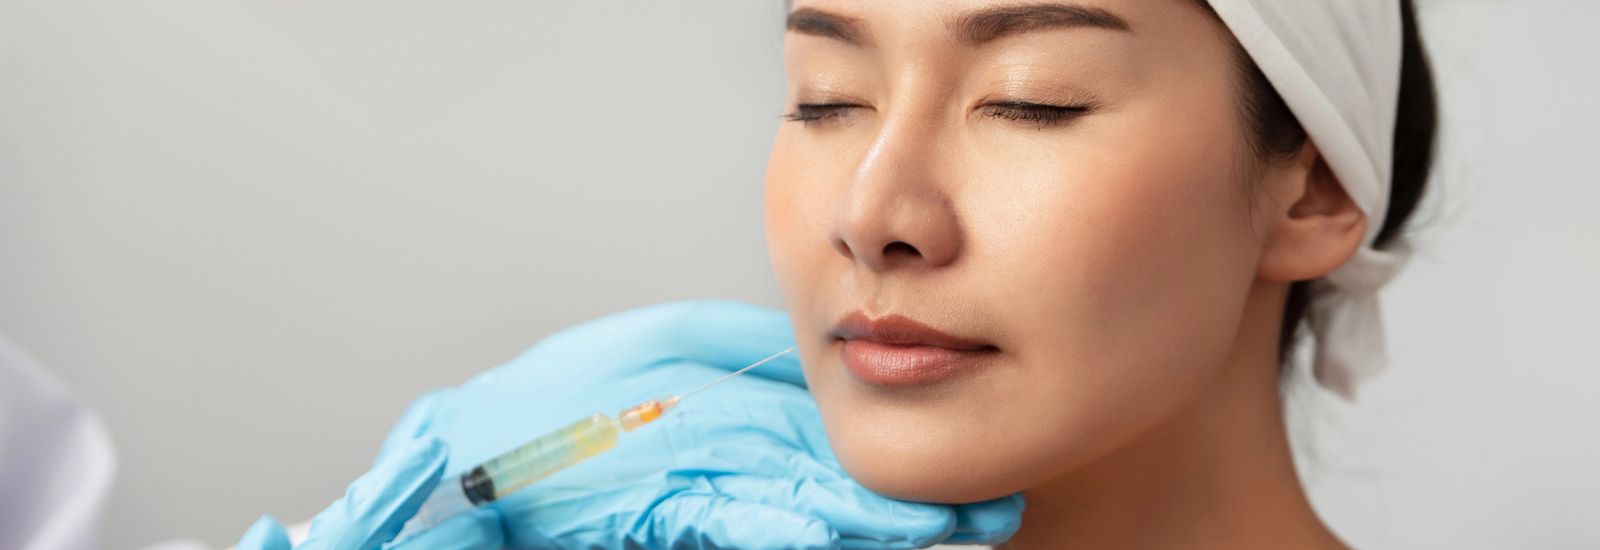 Cheek filler injection treatment injection